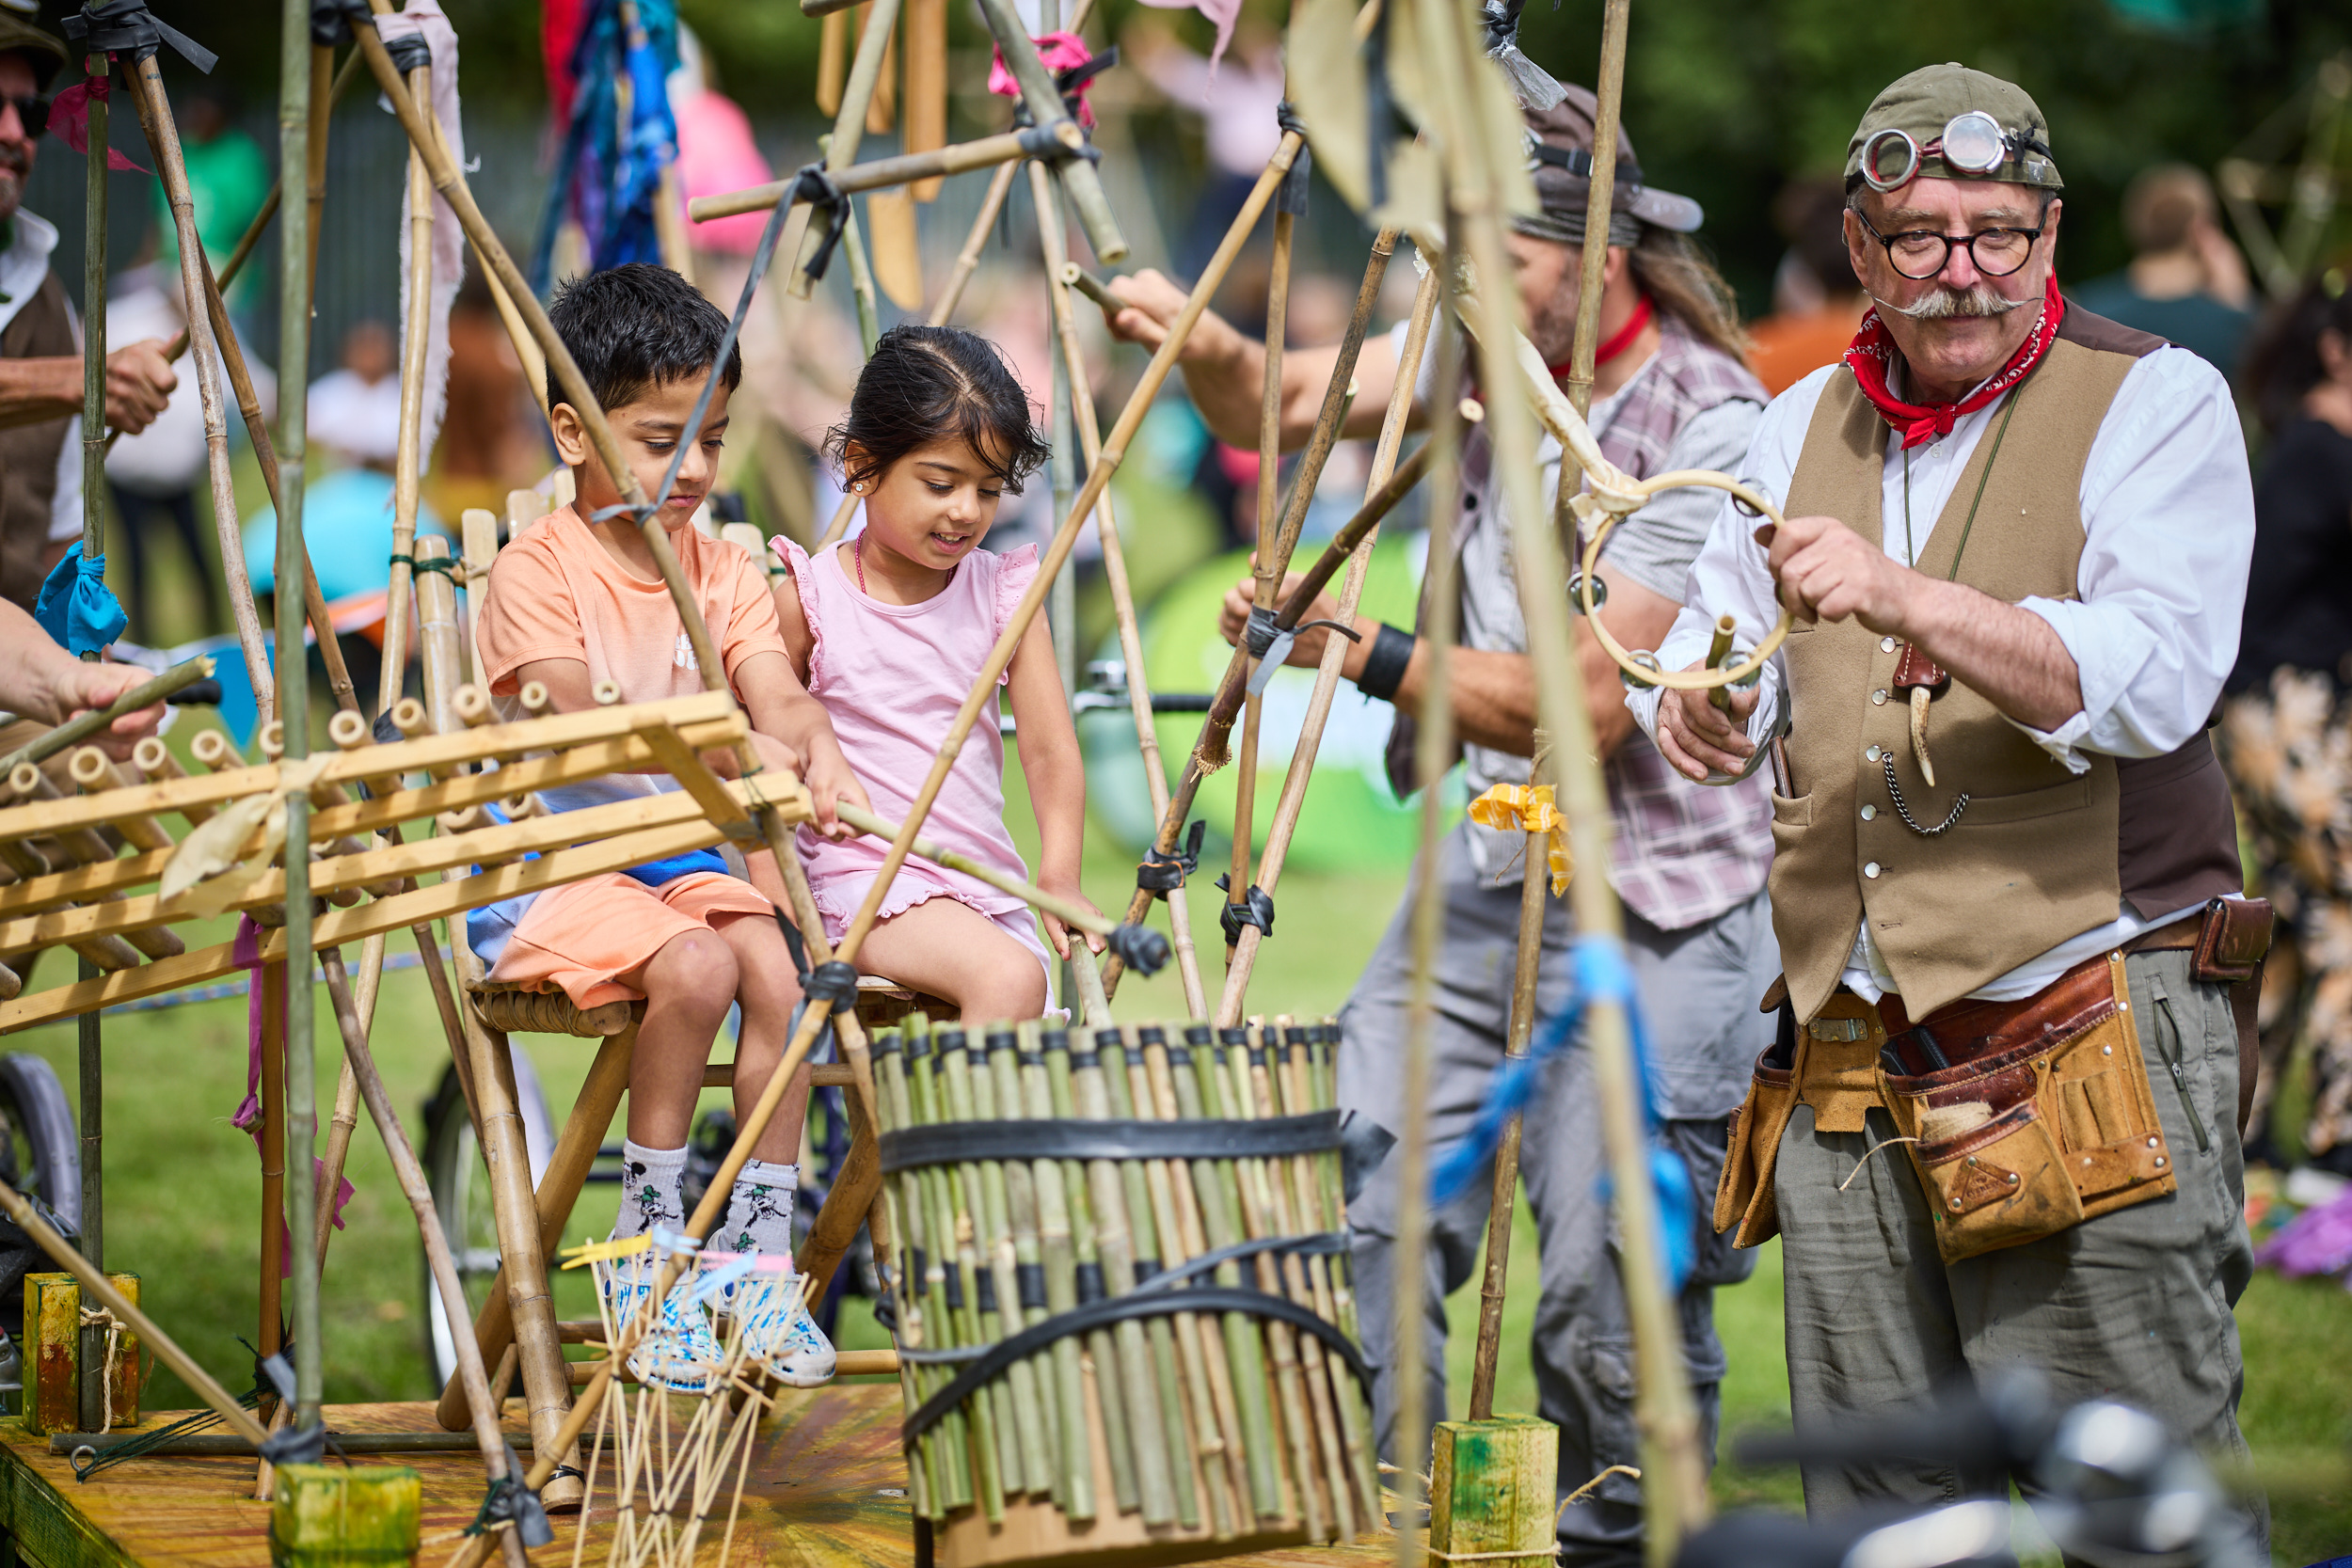 Two children sit in a contraption made of bamboo, with a xylophone and tambourine